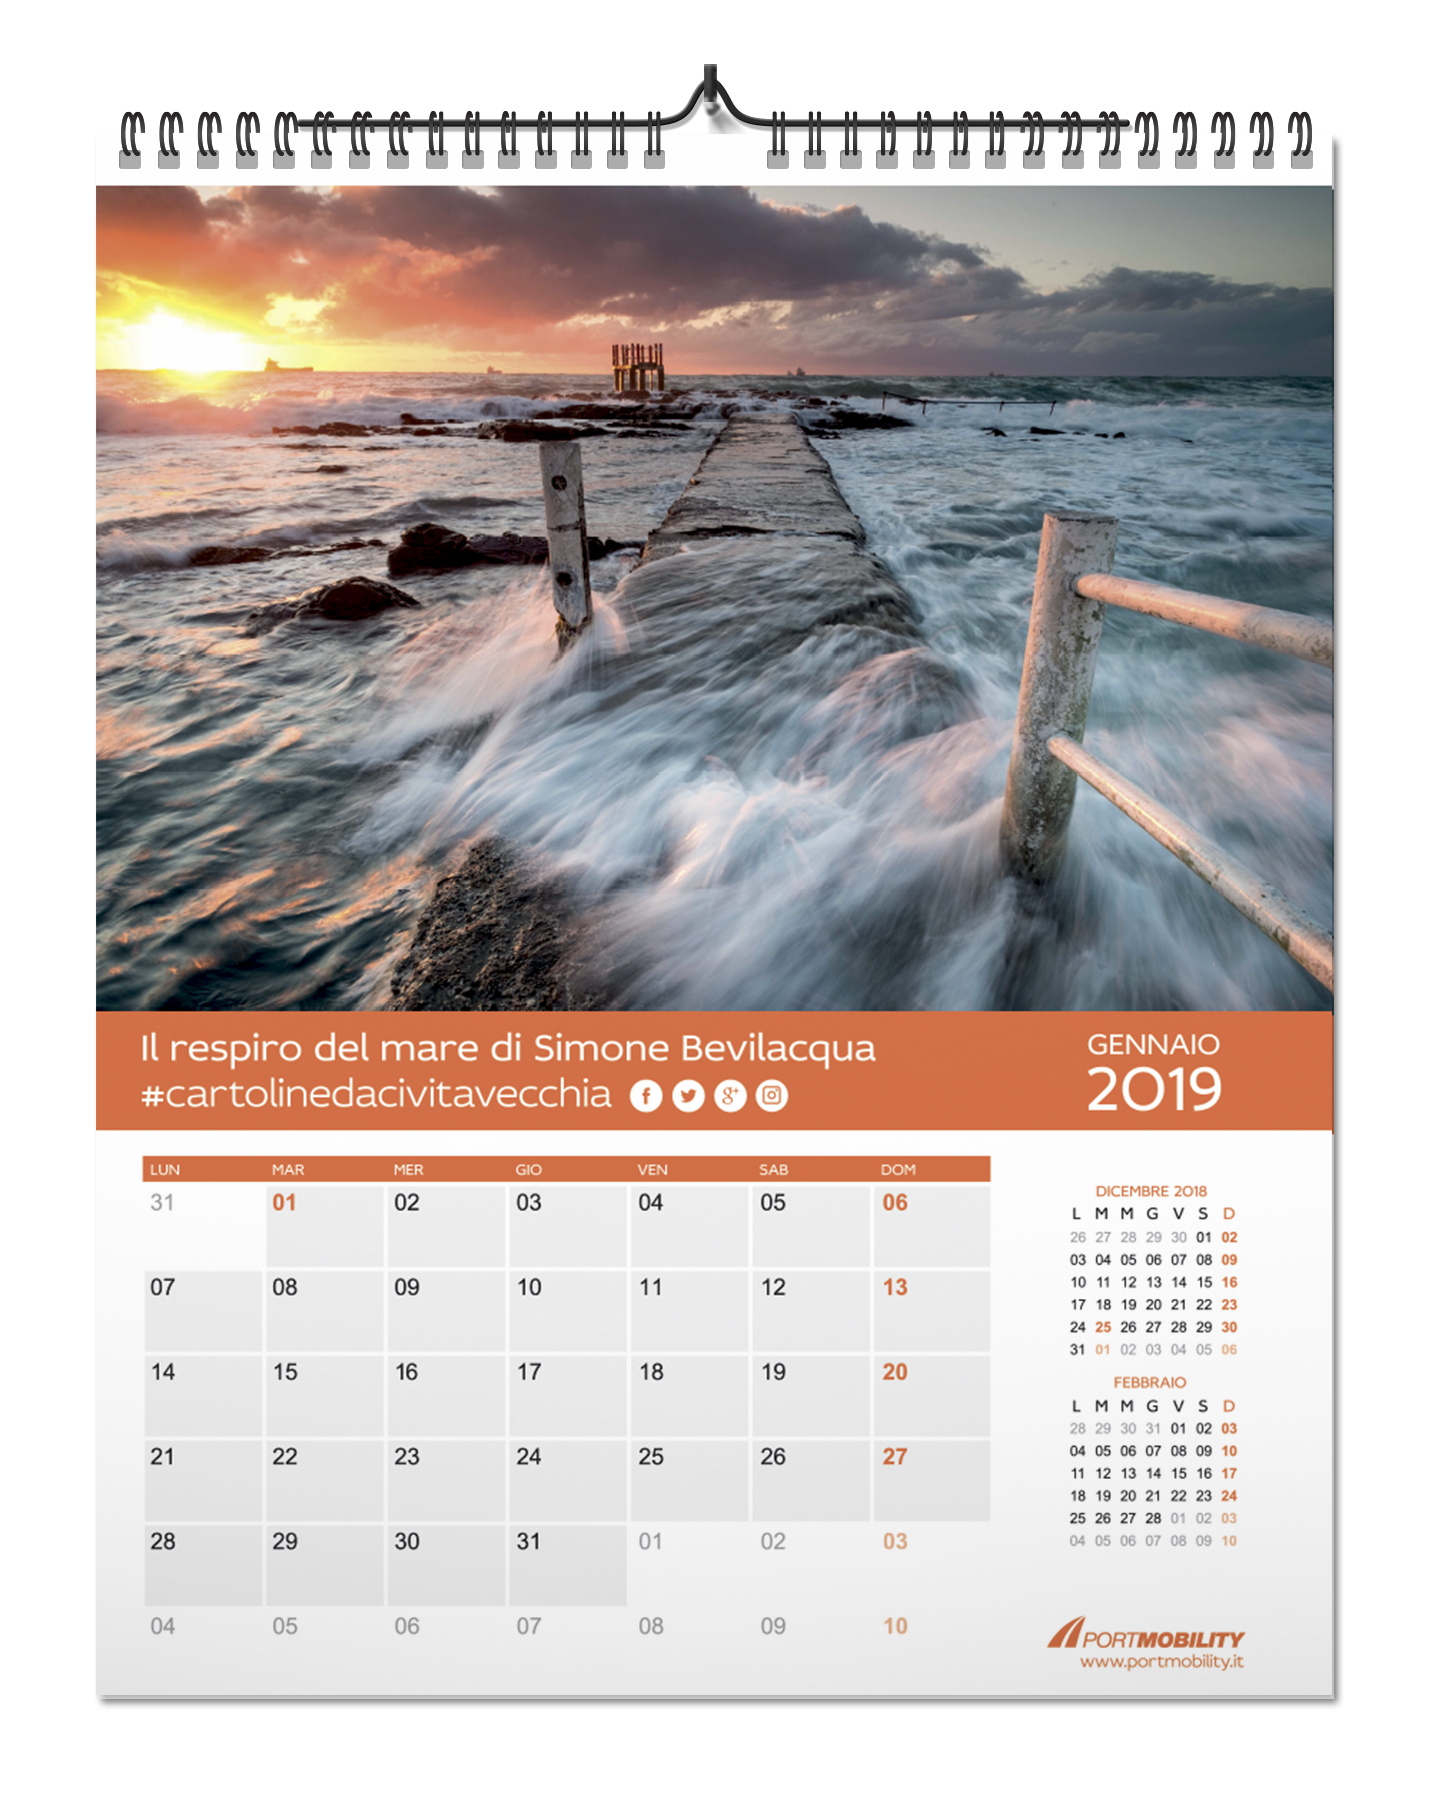 Postcards from Civitavecchia 2019: month of January